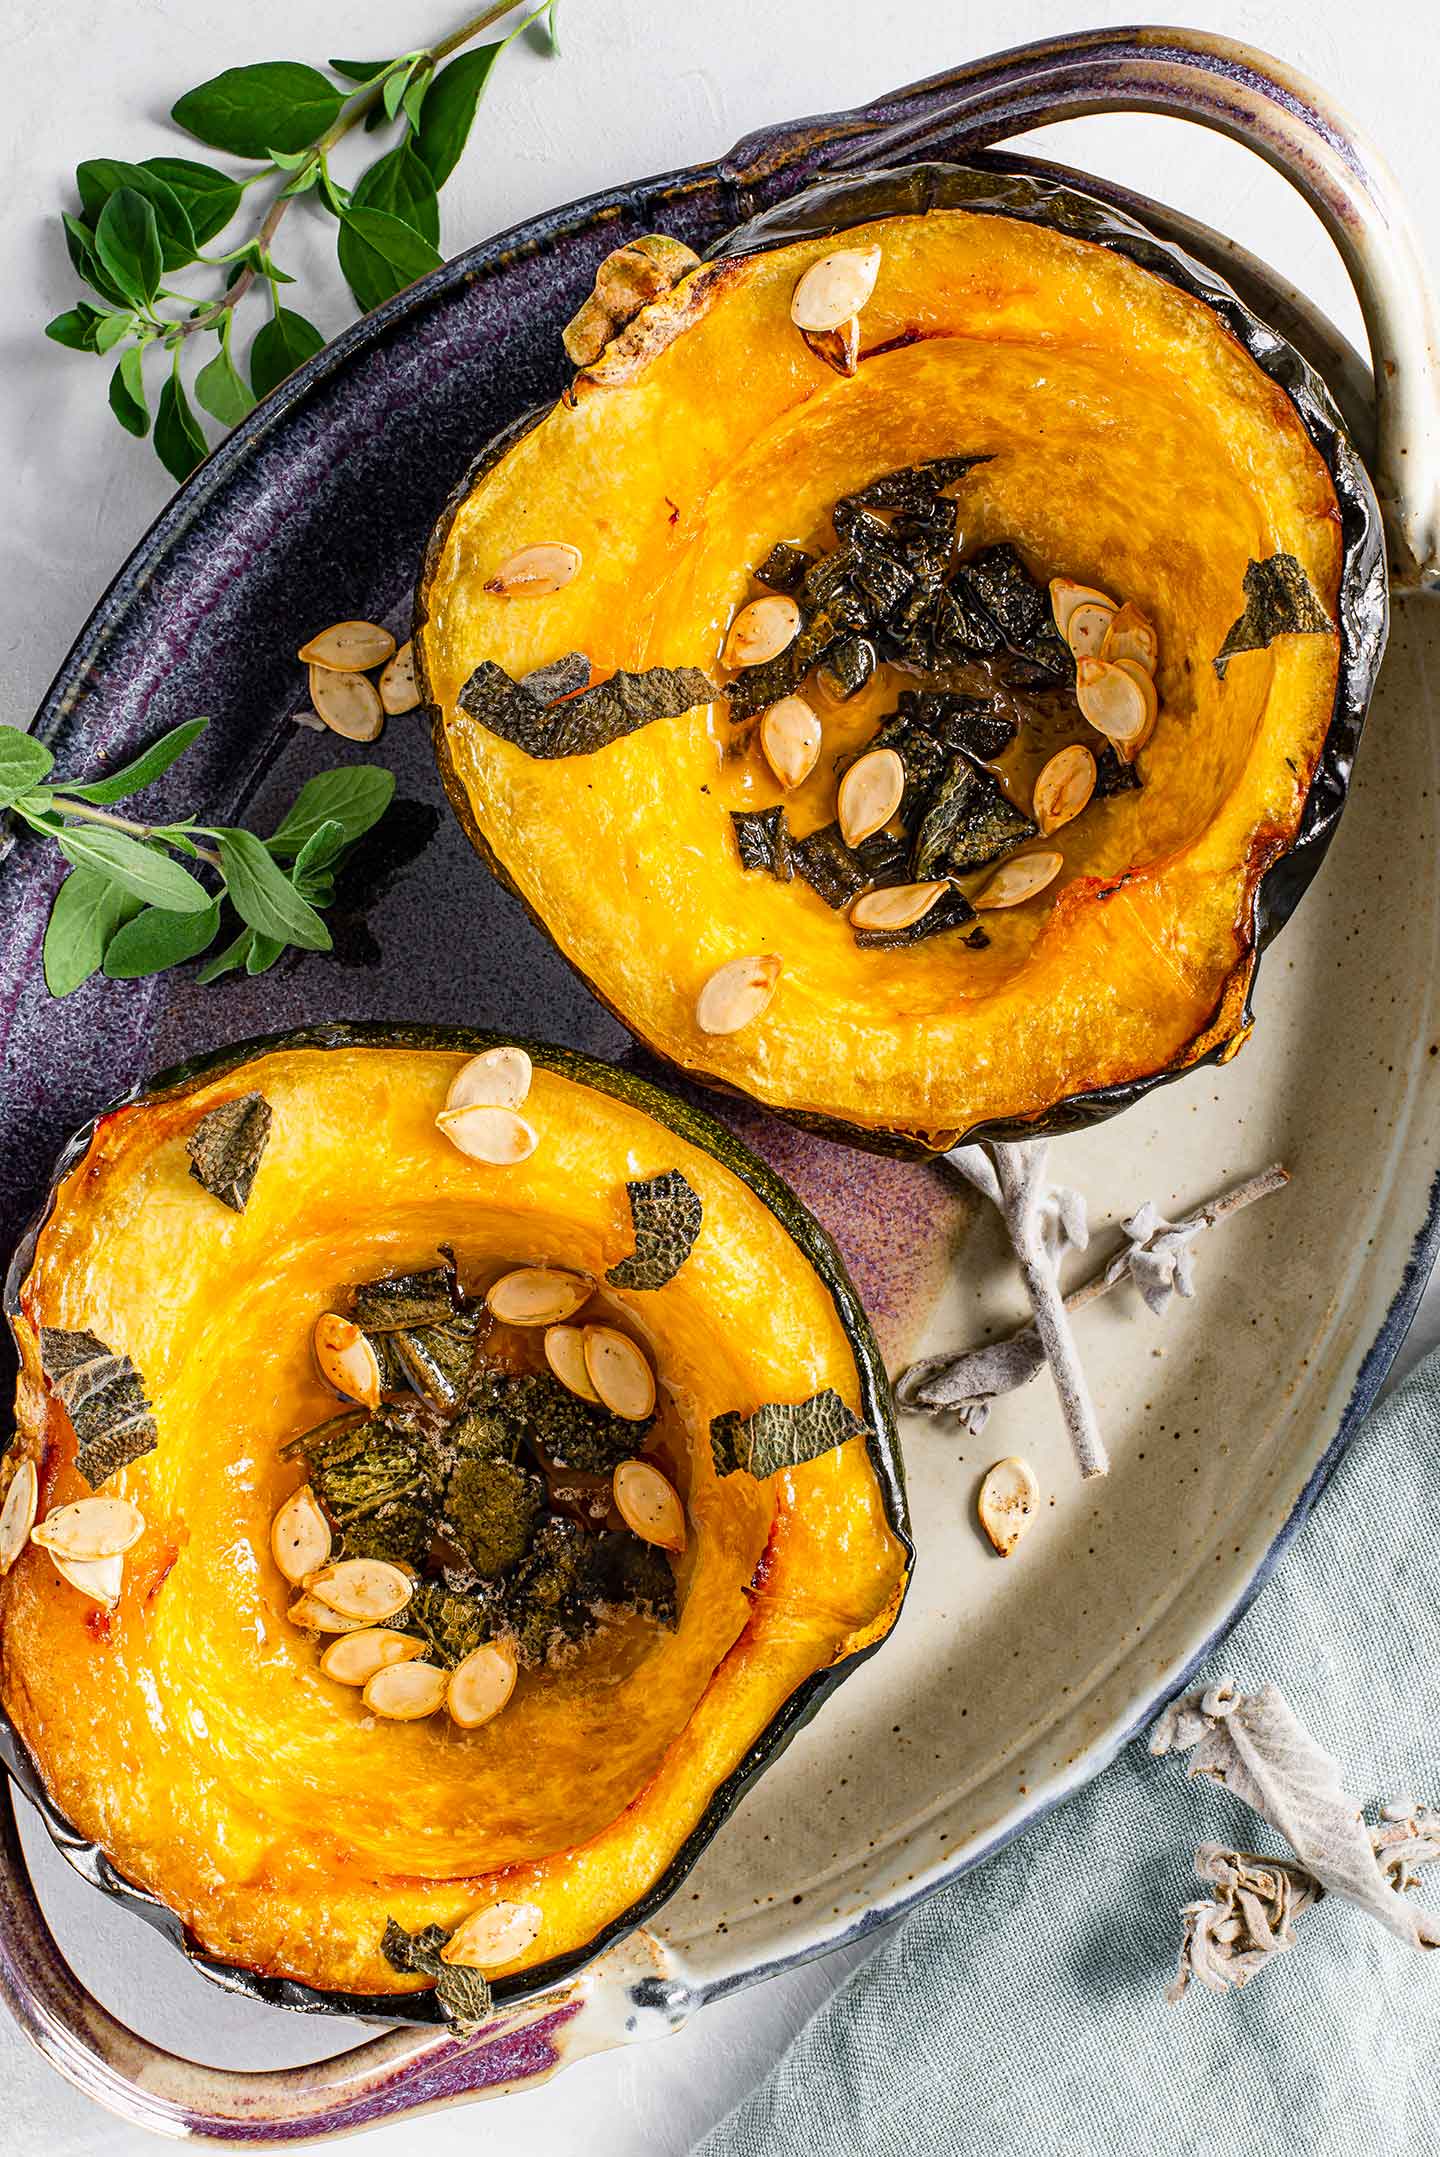 Top down view of two roasted acorn squash halves caramelized with maple syrup and sprinkled with sage and roasted squash seeds.